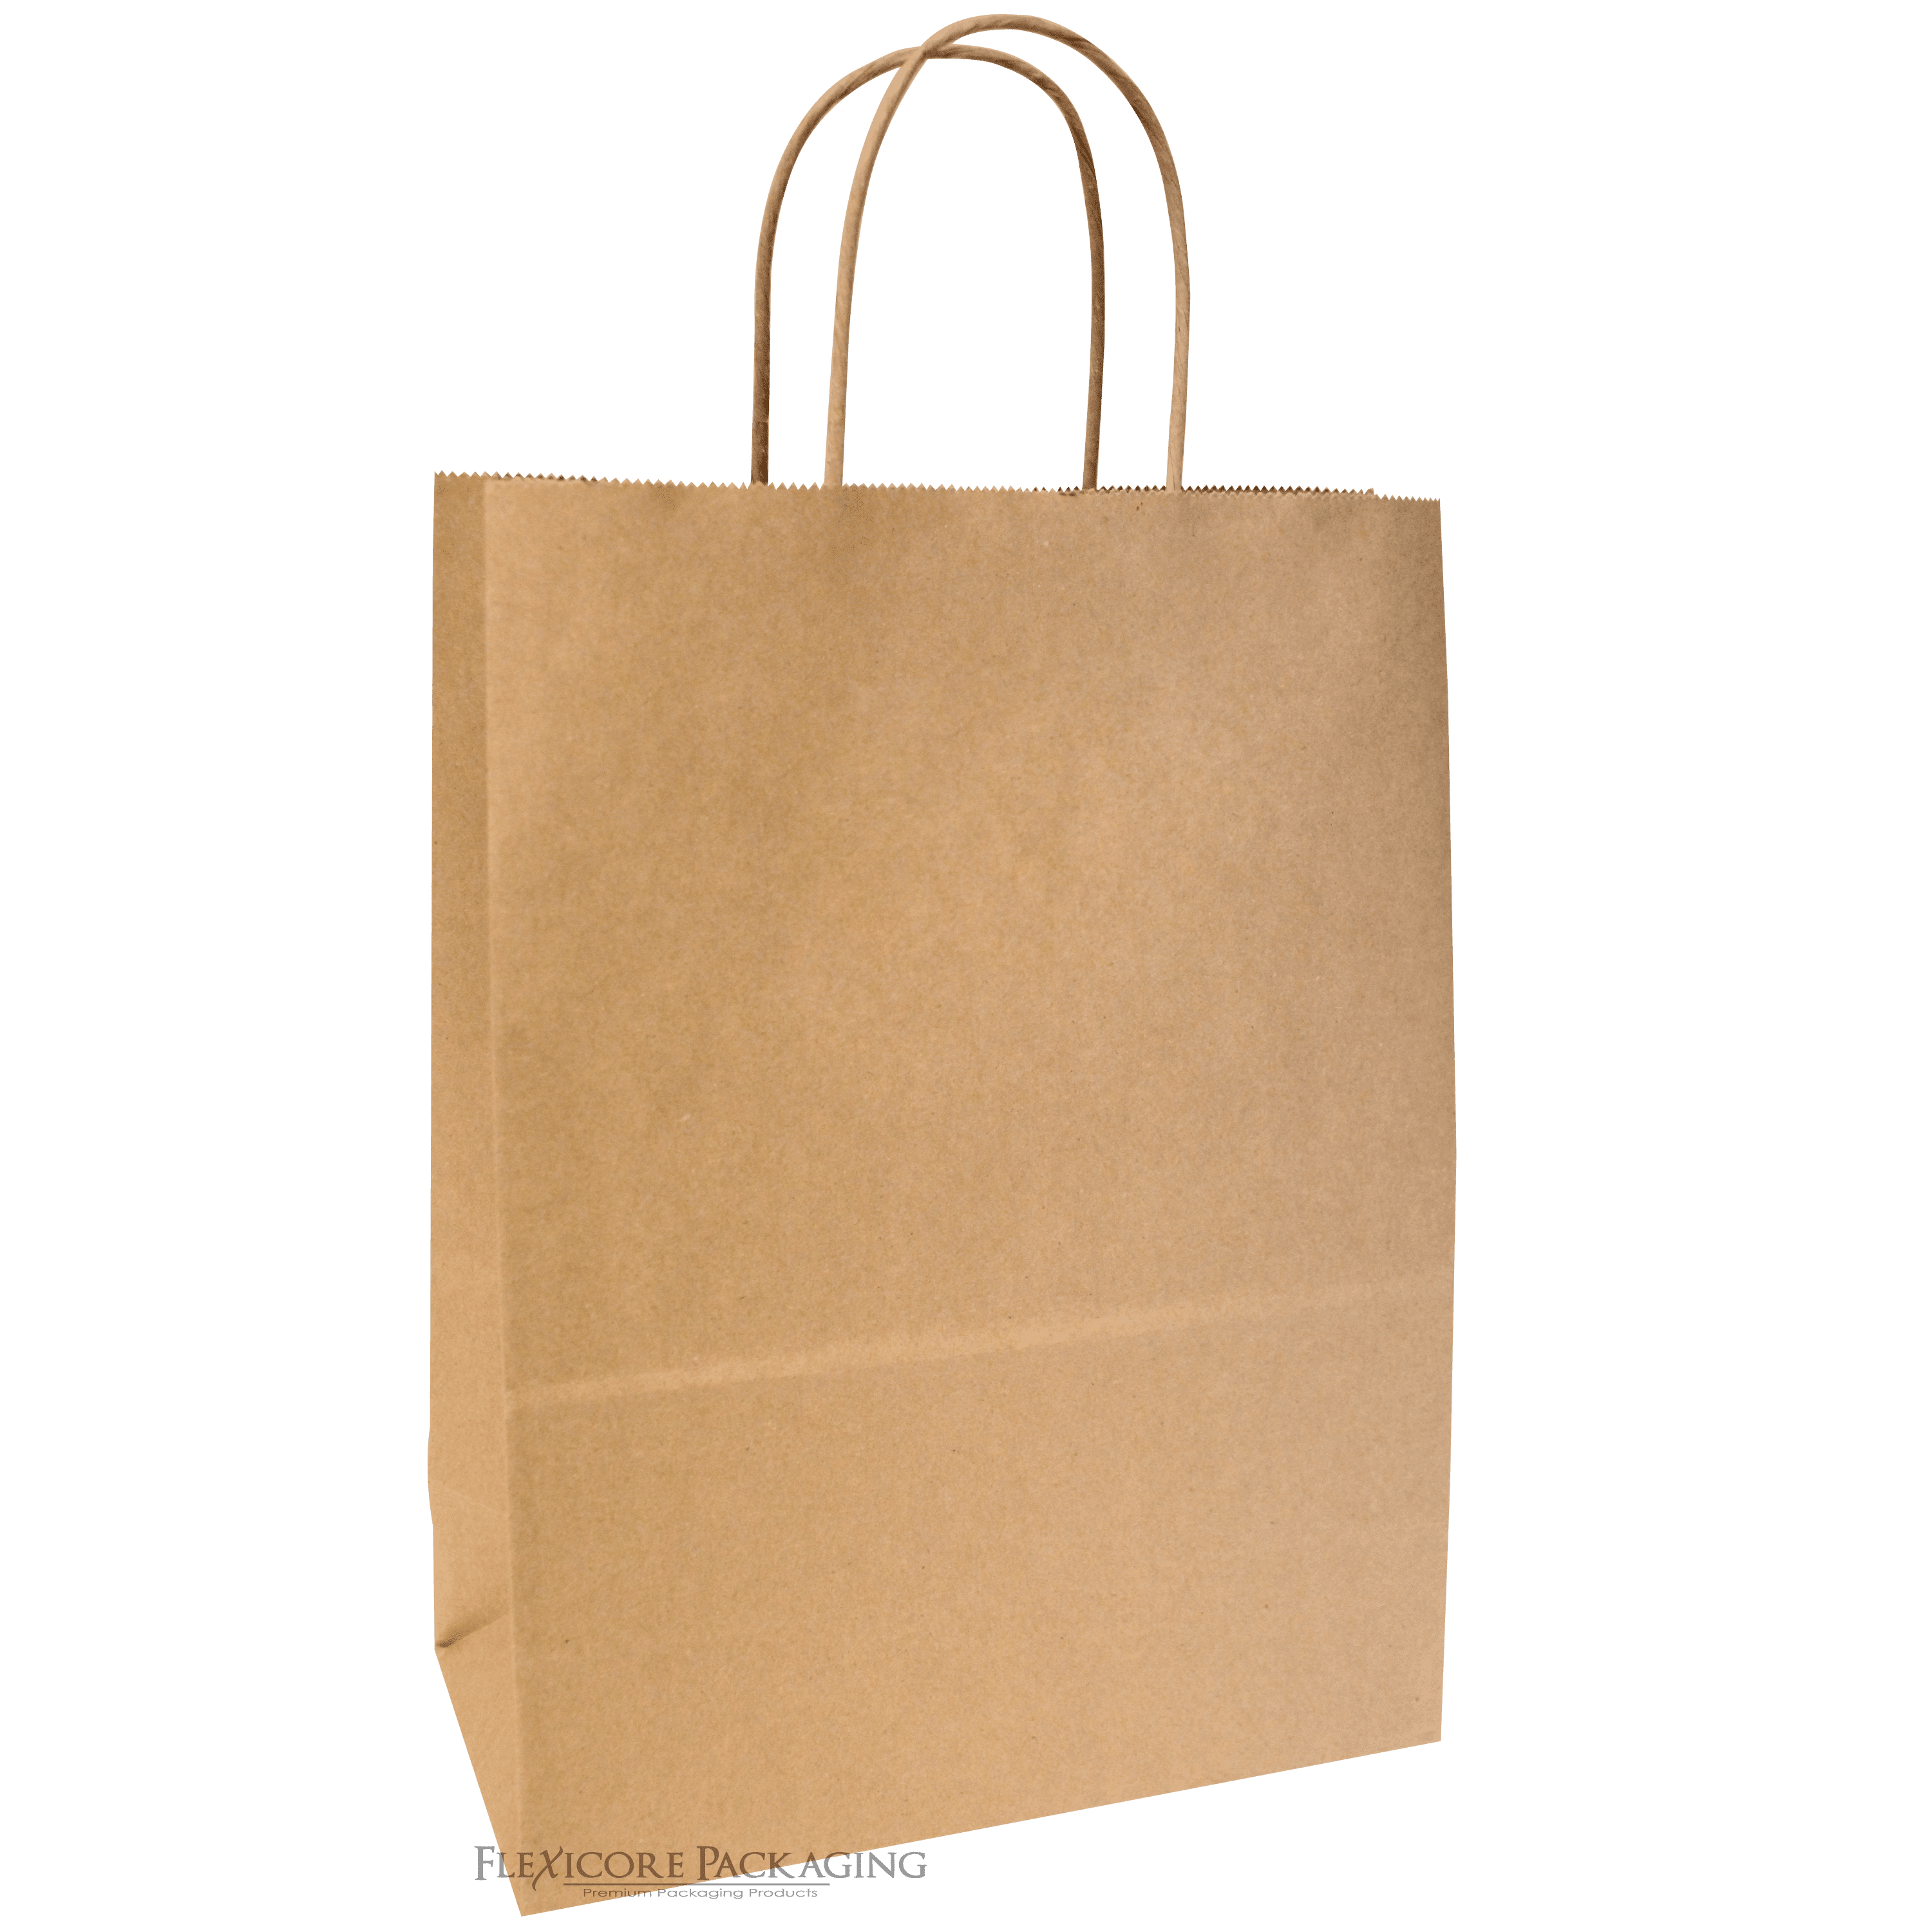 Size 20 x 18 x 8 Navy Blue Paper Carrier Bags with Twisted Paper Handles 